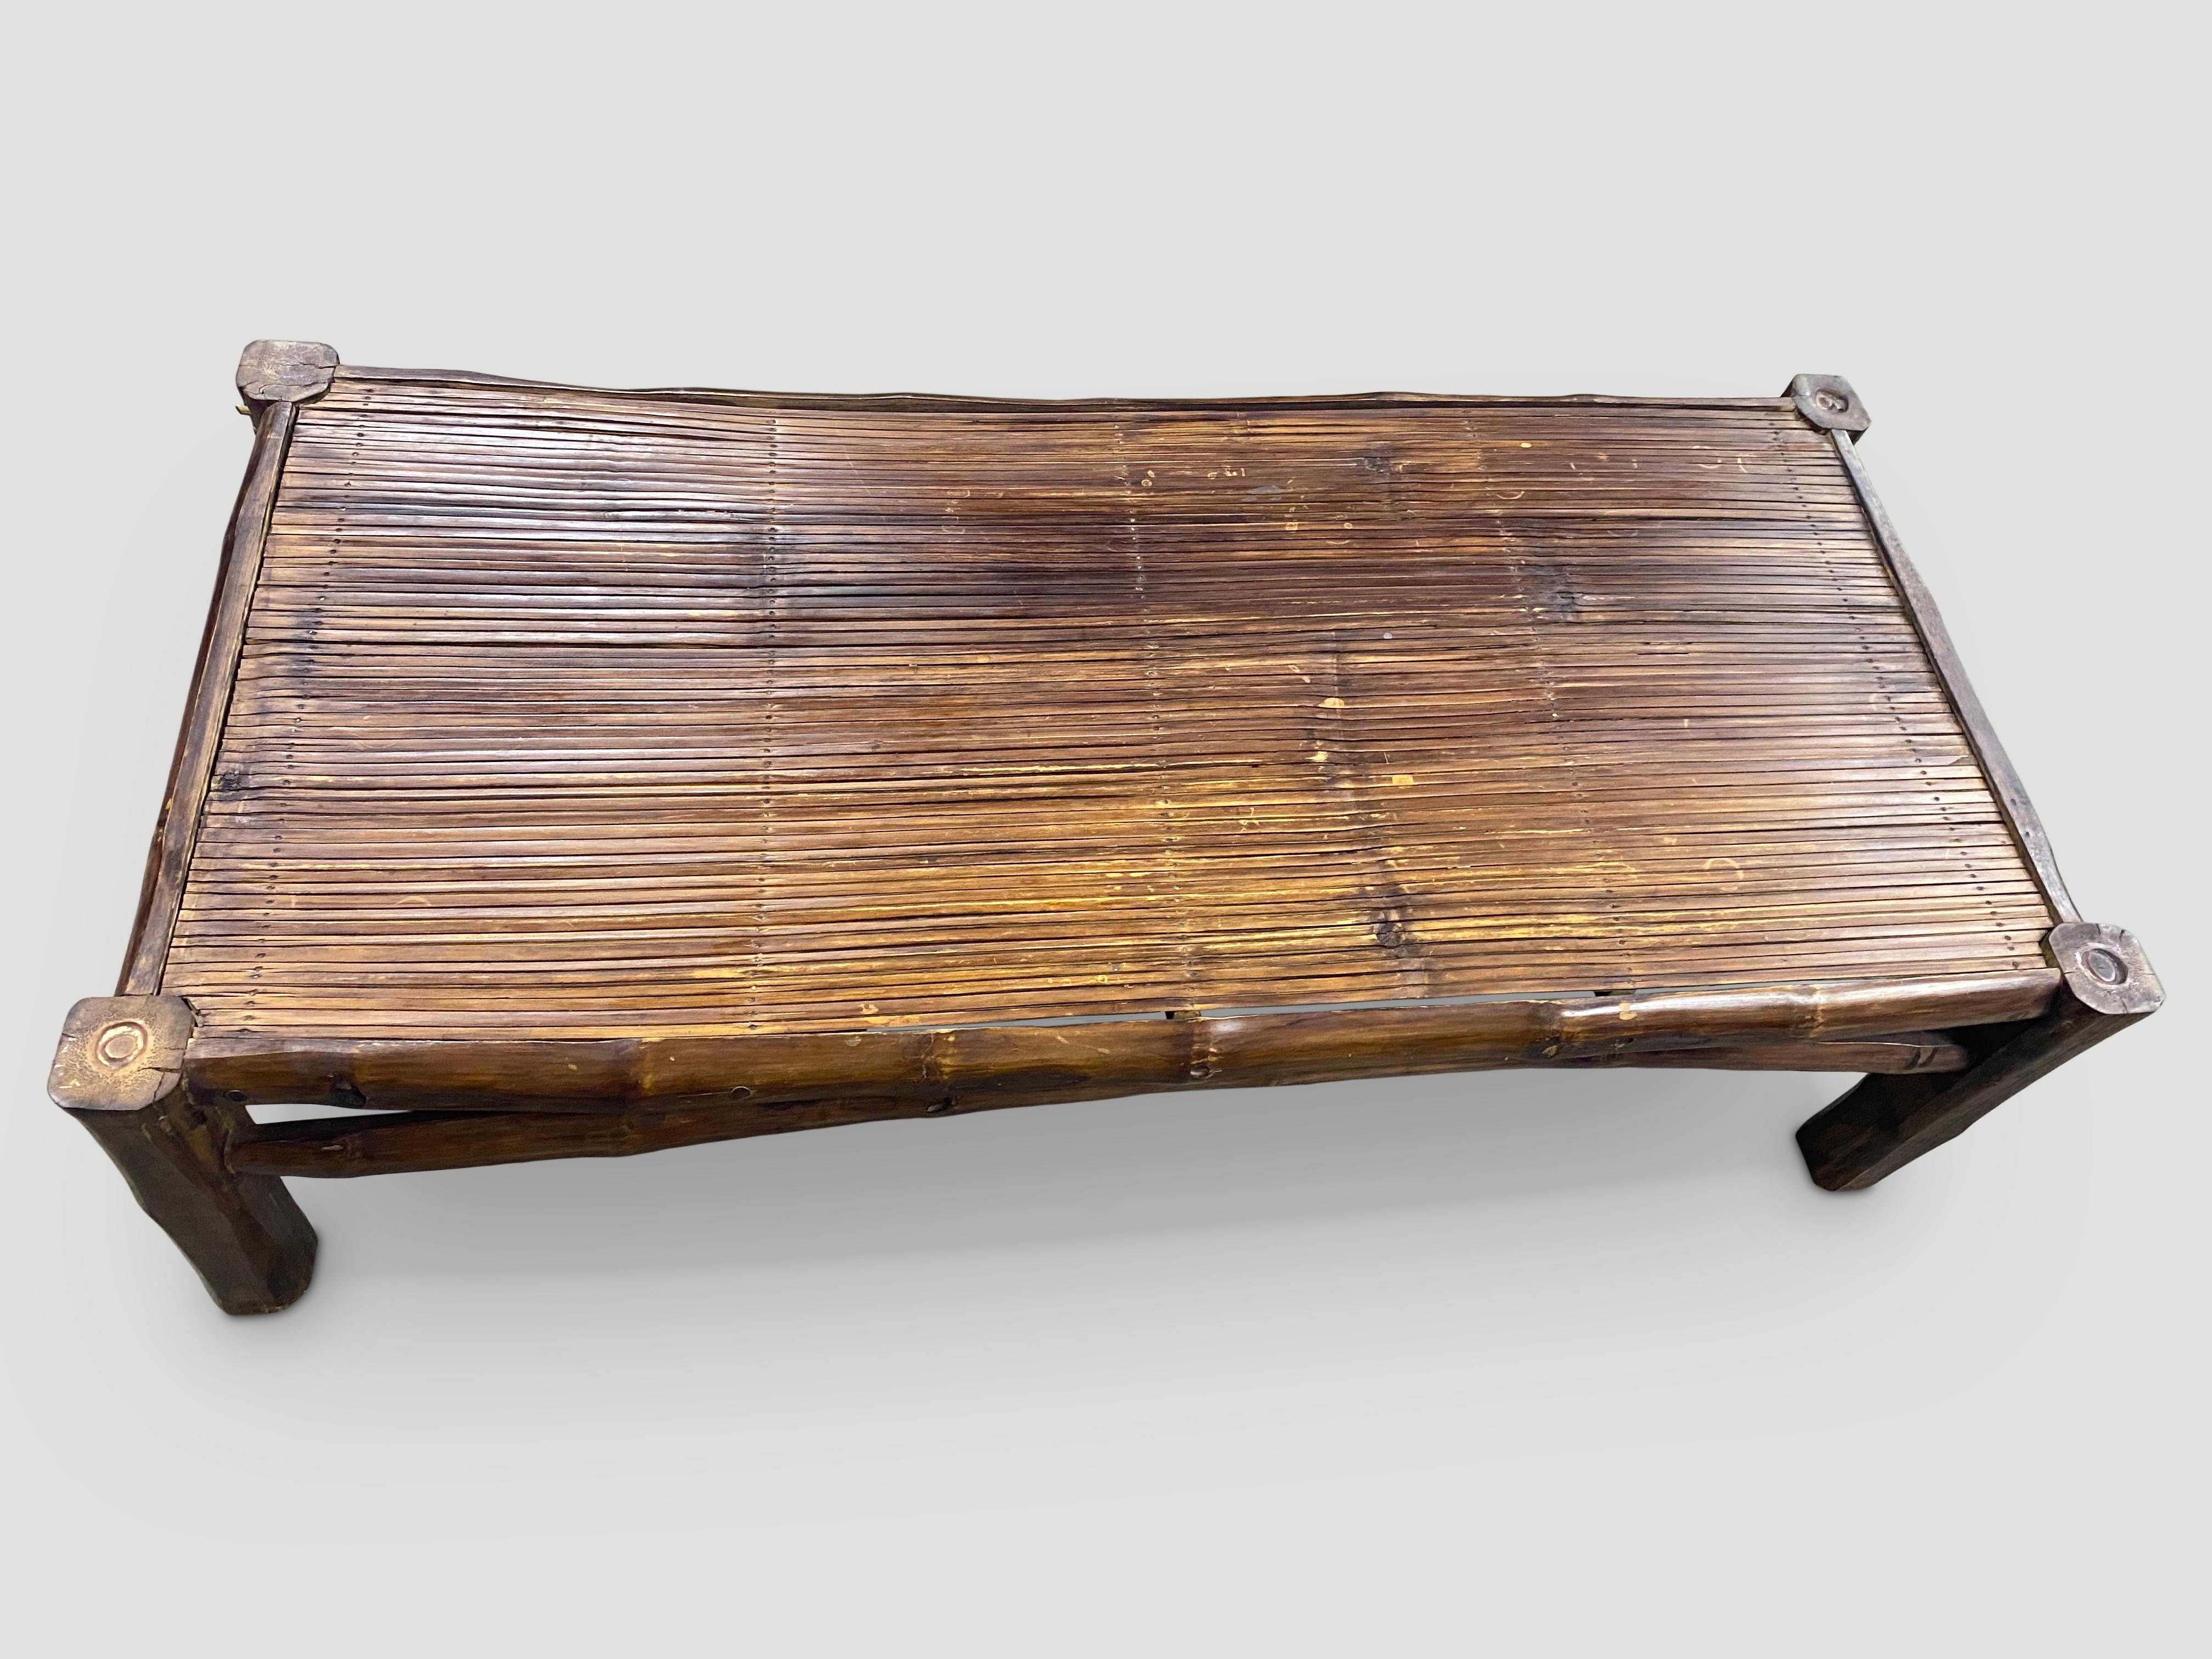 The bamboo coffee table is handmade from antique bamboo. Lightweight and easy to move.

This coffee table was handmade in the spirit of Wabi-Sabi, a Japanese philosophy that beauty can be found in imperfection and impermanence. It is a beauty of